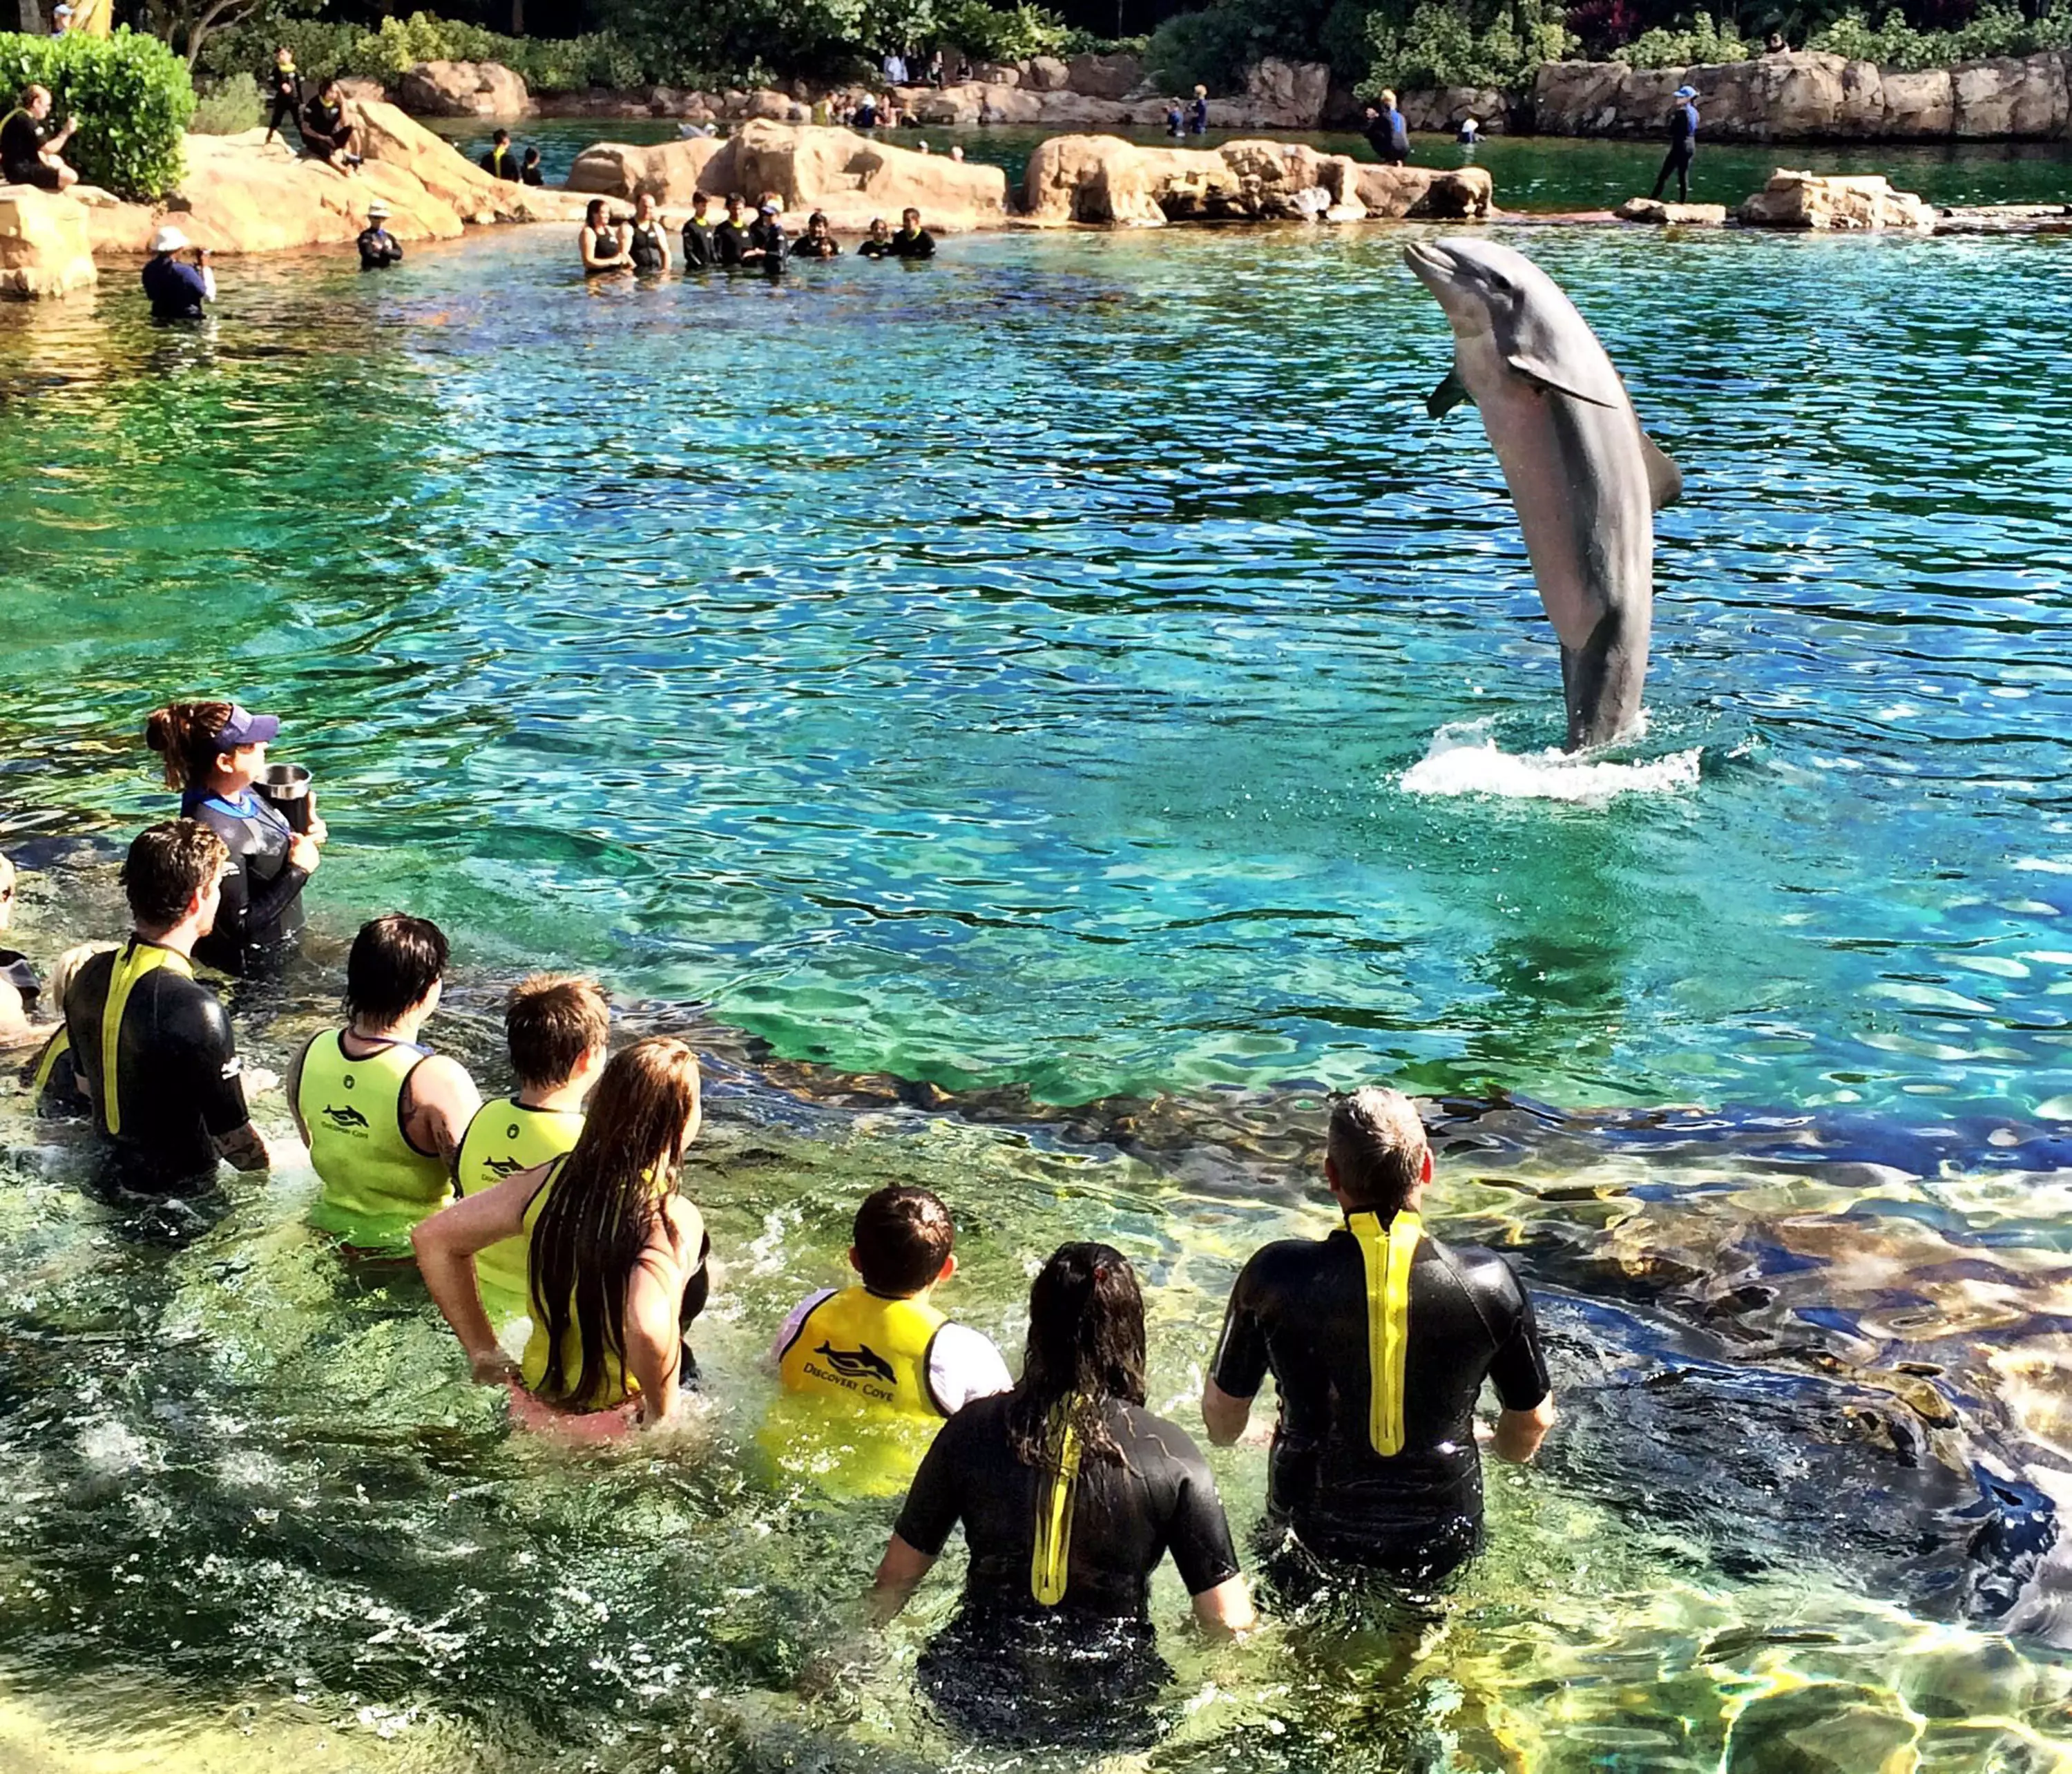 Animal rights campaigners want all captive sea mammal shows ended.